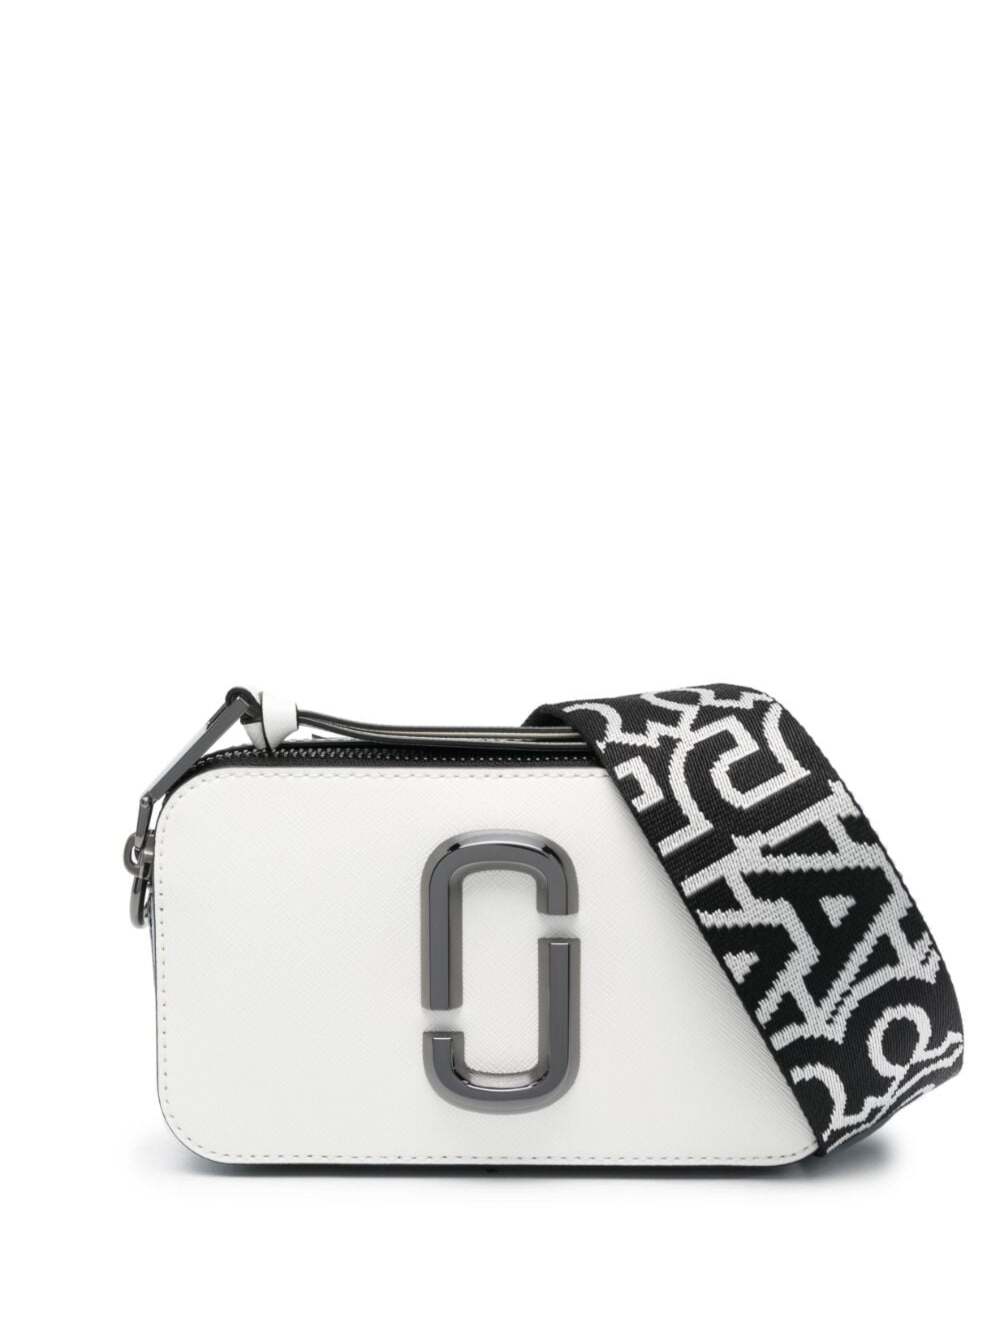 MARC JACOBS THE SNAPSHOT WHITE SHOULDER BAG WITH METAL LOGO AT THE FRONT IN LEATHER WOMAN